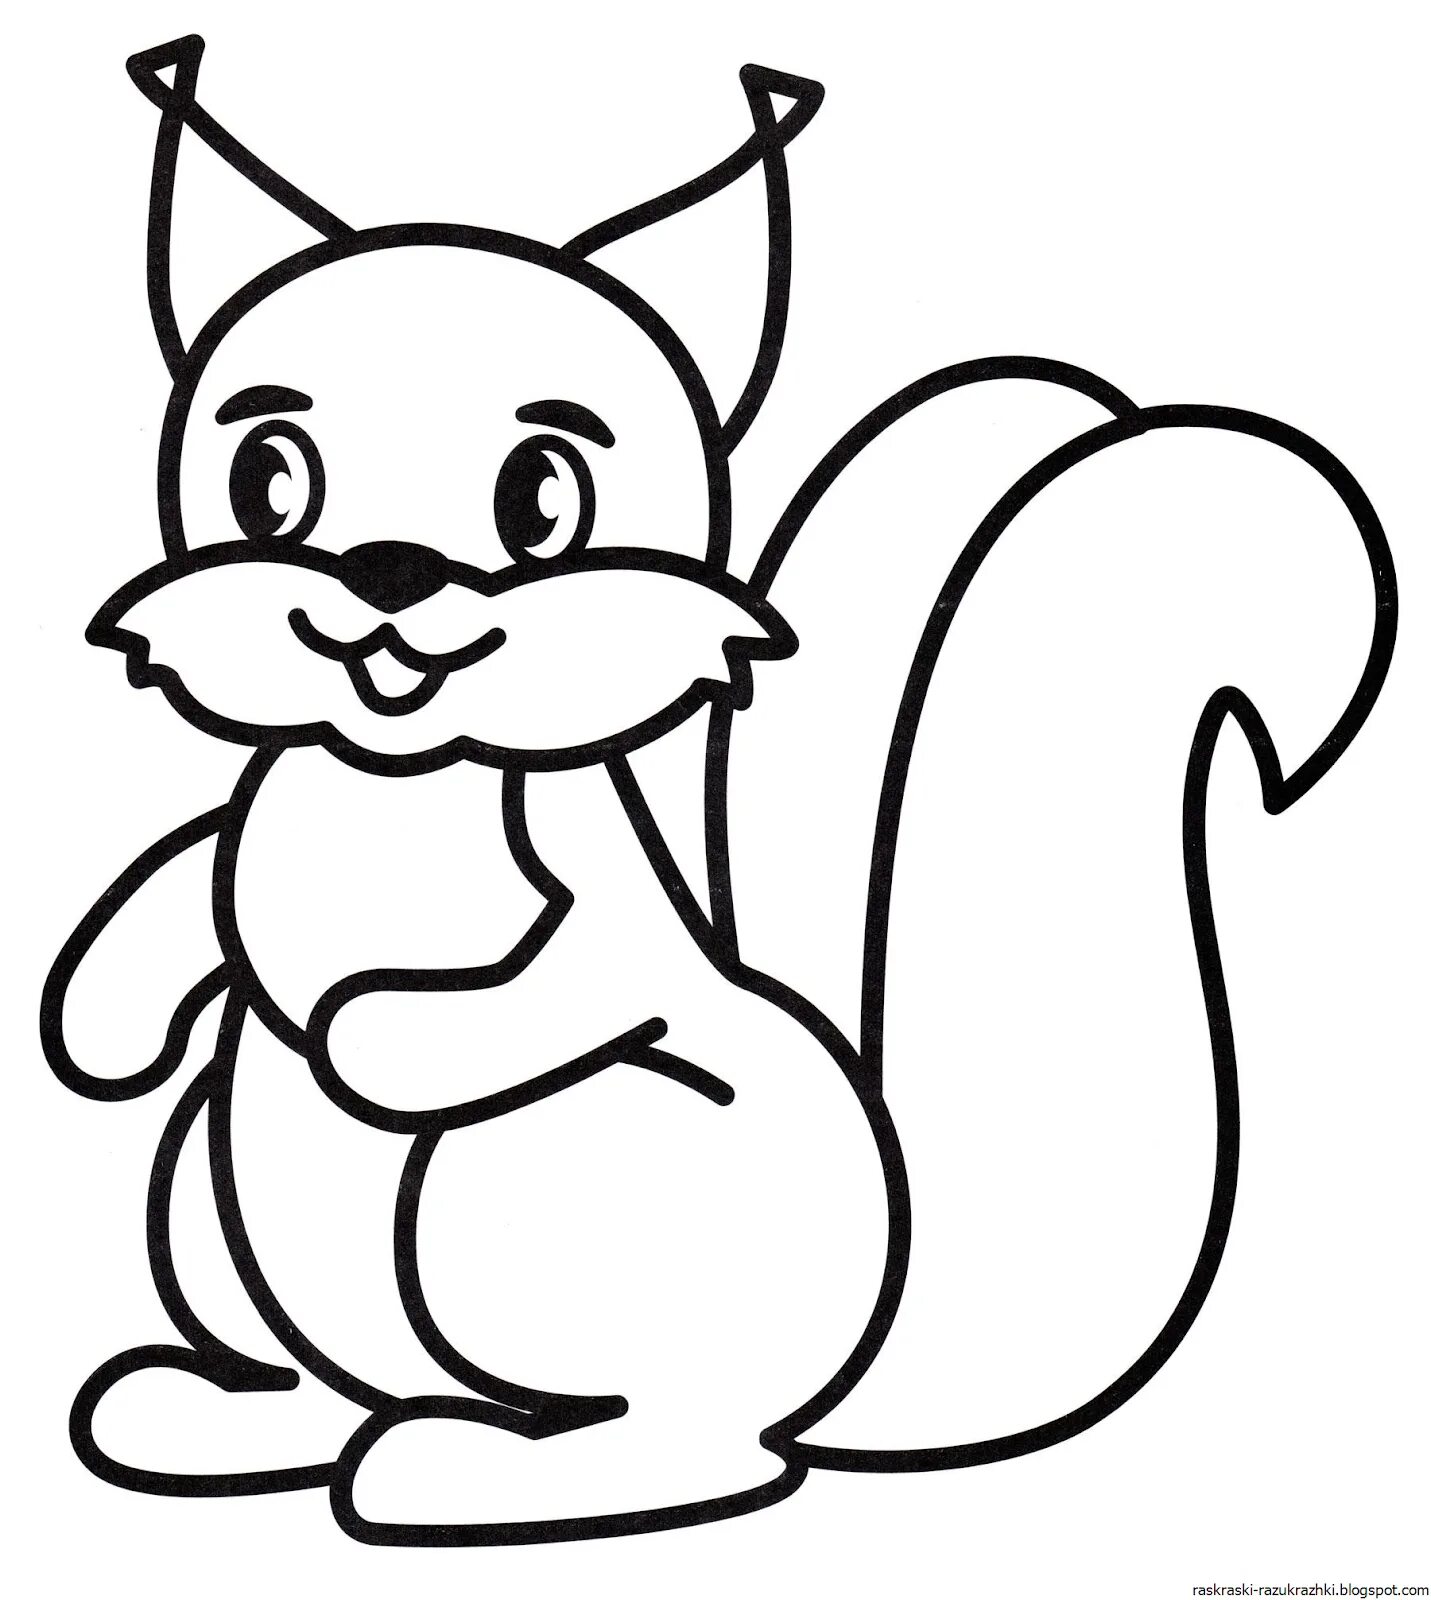 Witty squirrel coloring book for 2-3 year olds